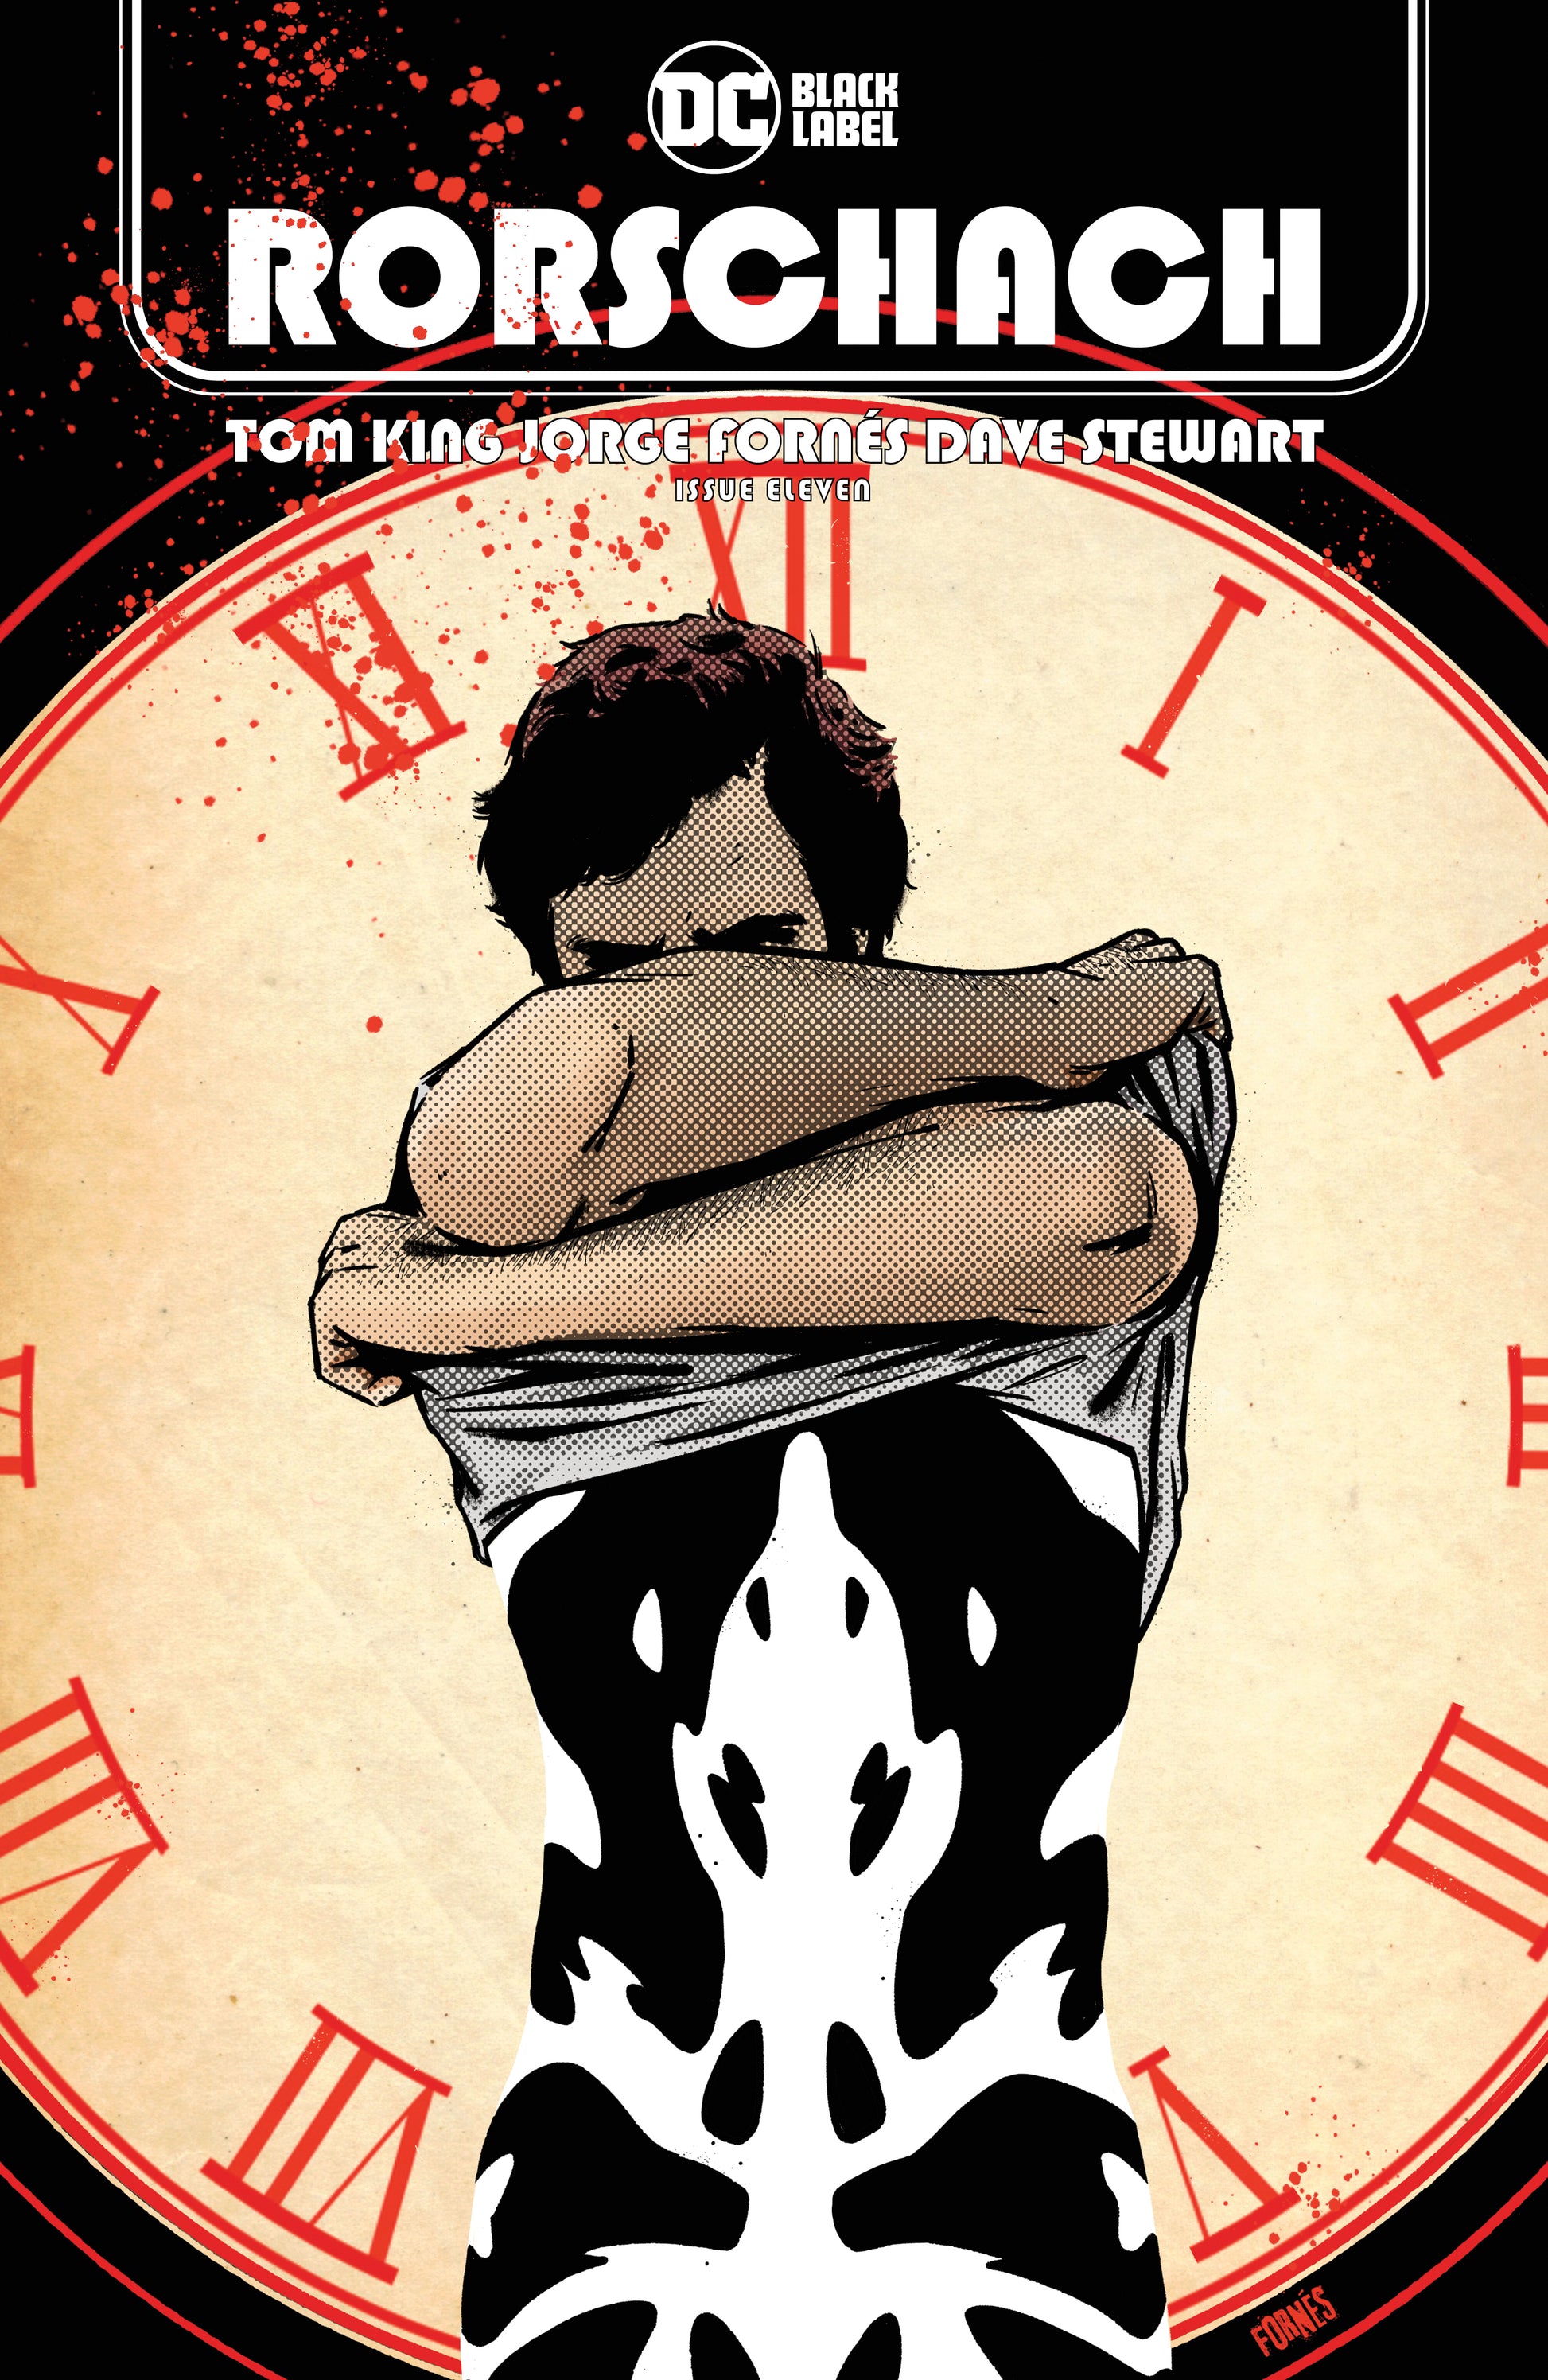 Rorschach by King & Fornes: The Independent Sequel - Comic Book Herald